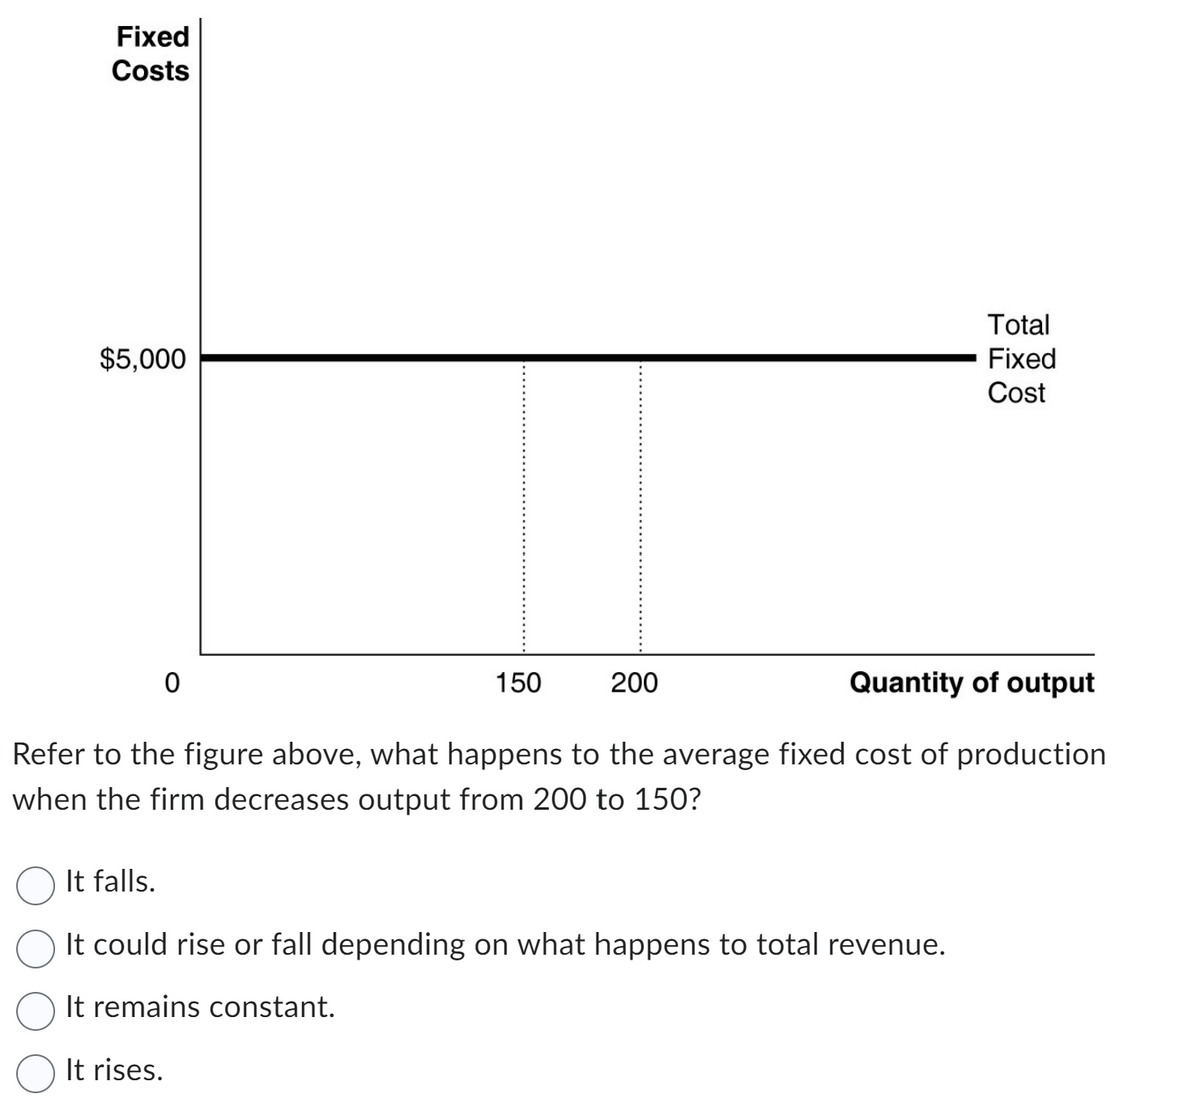 Fixed
Costs
$5,000
0
Quantity of output
Refer to the figure above, what happens to the average fixed cost of production
when the firm decreases output from 200 to 150?
150
200
Total
Fixed
Cost
It falls.
It could rise or fall depending on what happens to total revenue.
It remains constant.
It rises.